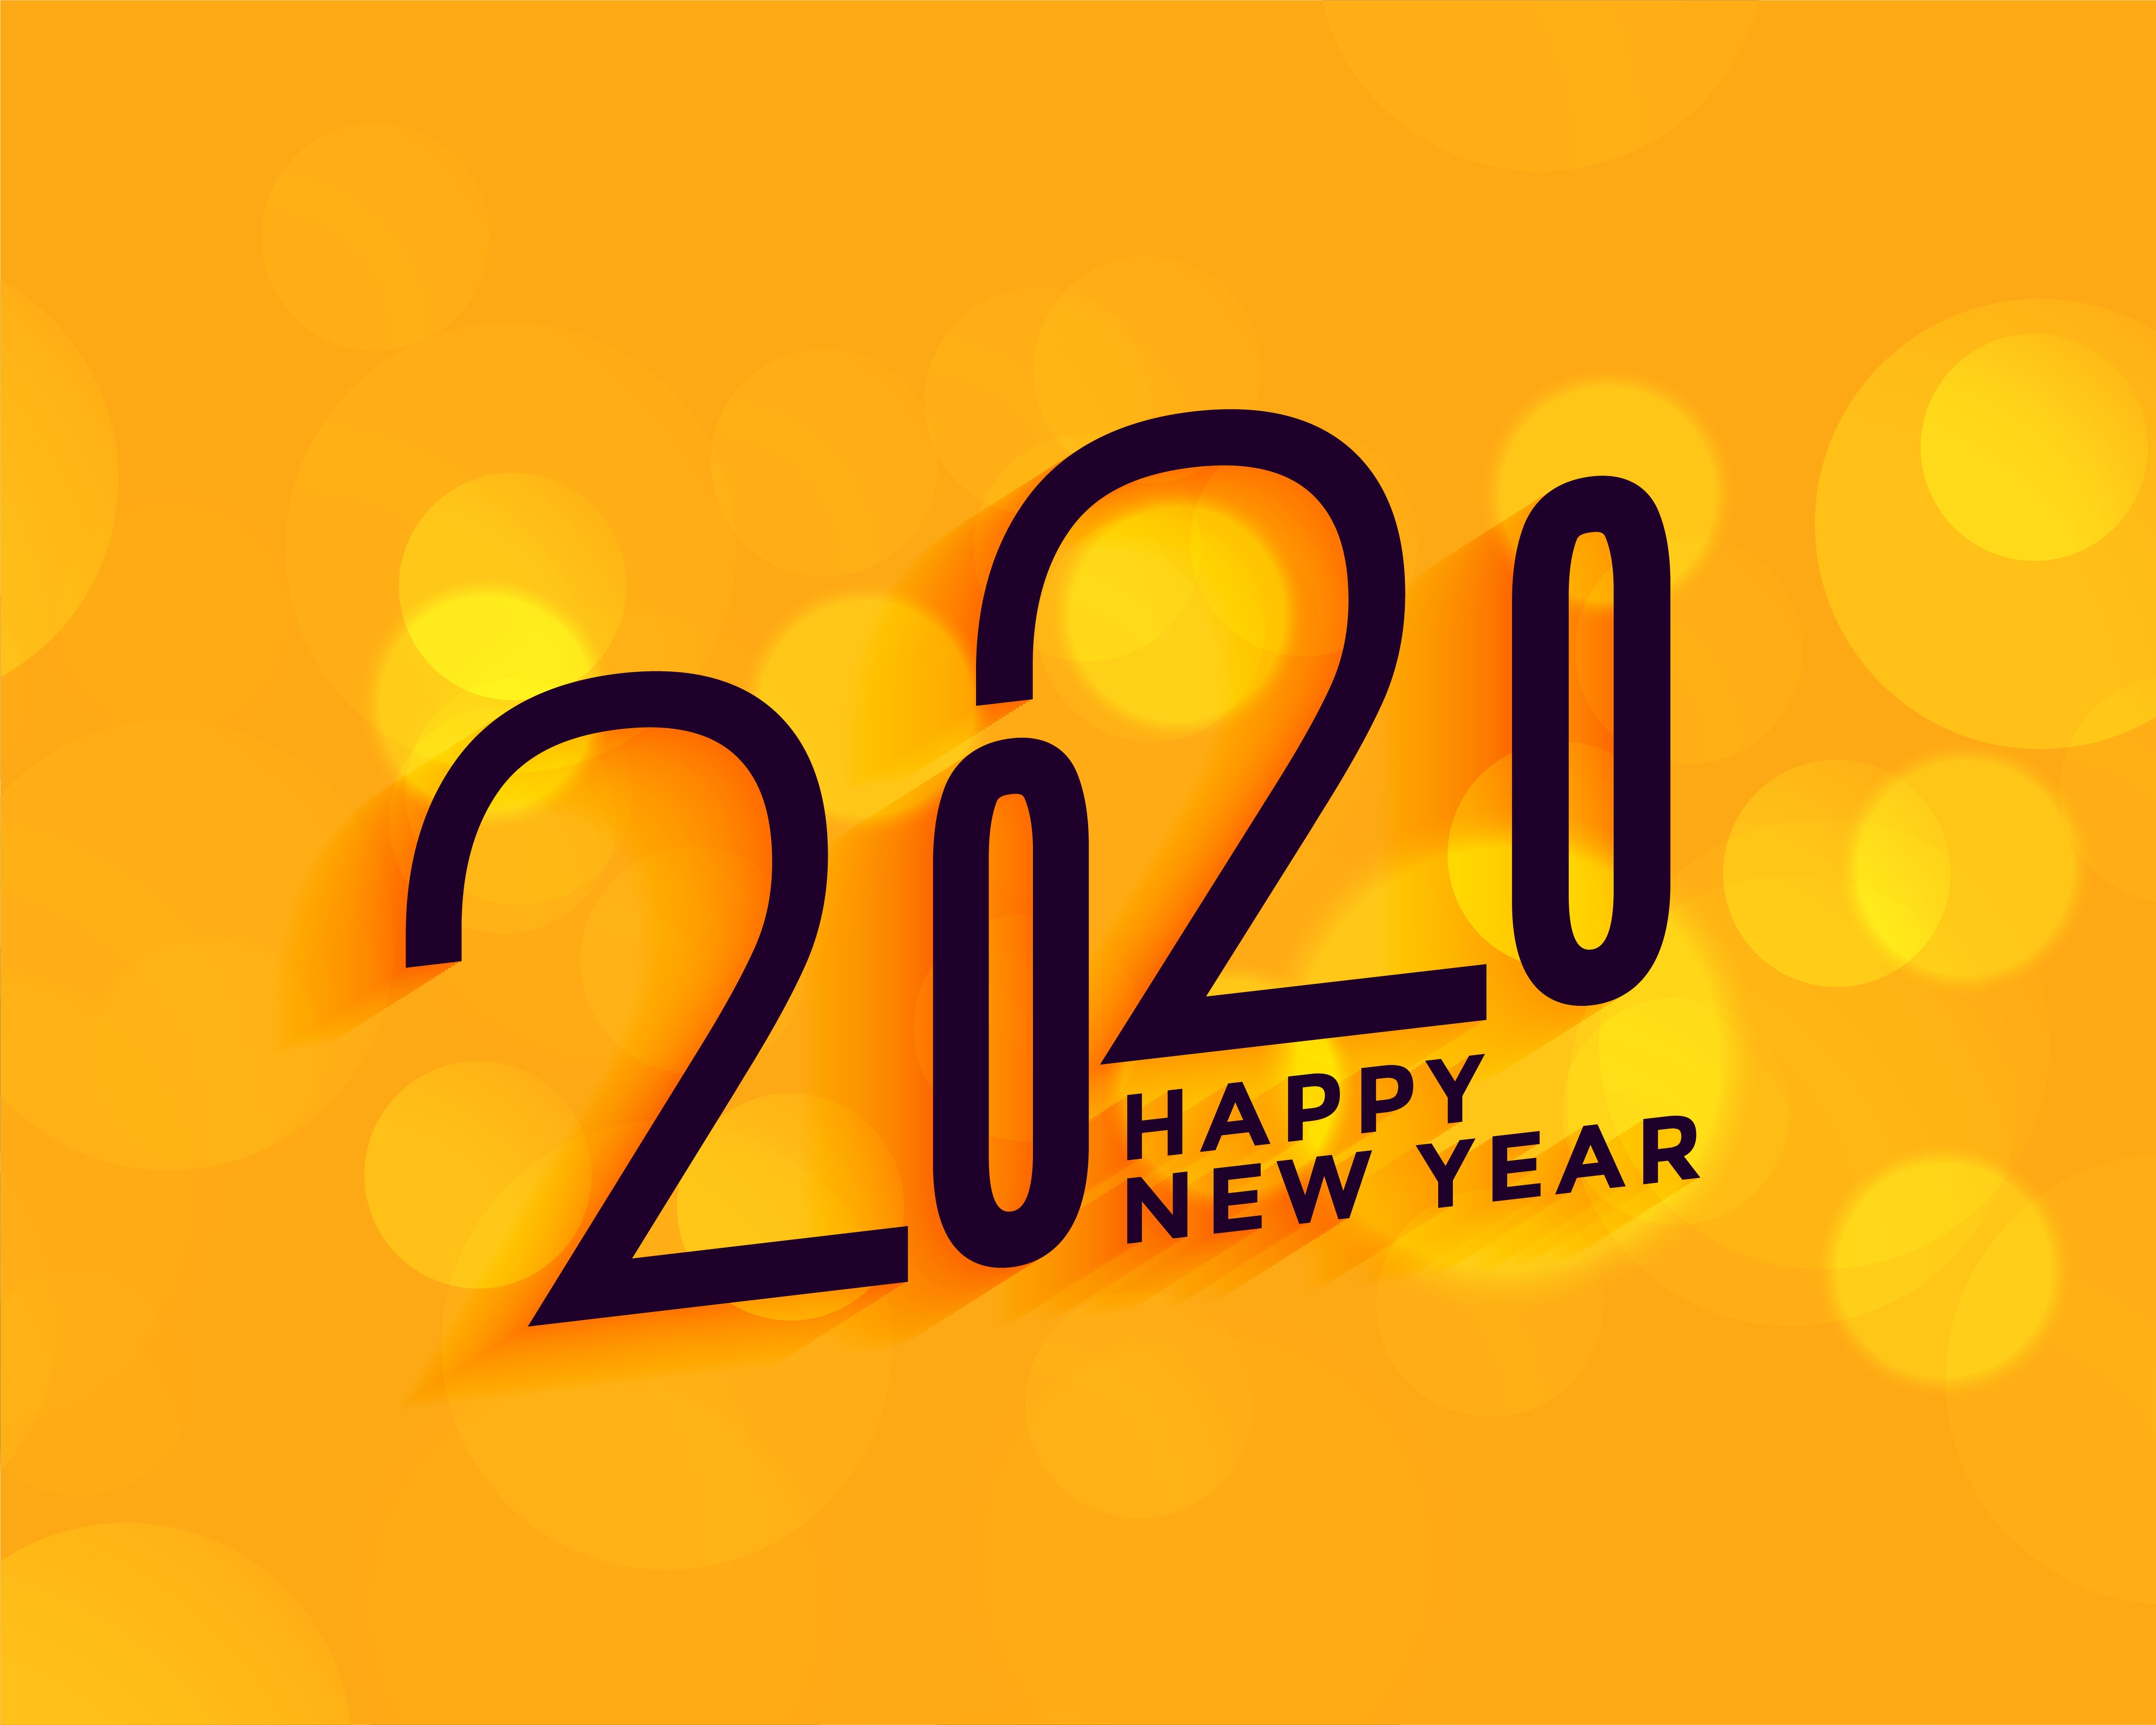 2020 New Year Wallpaper, HD Holidays 4K Wallpapers, Images ...